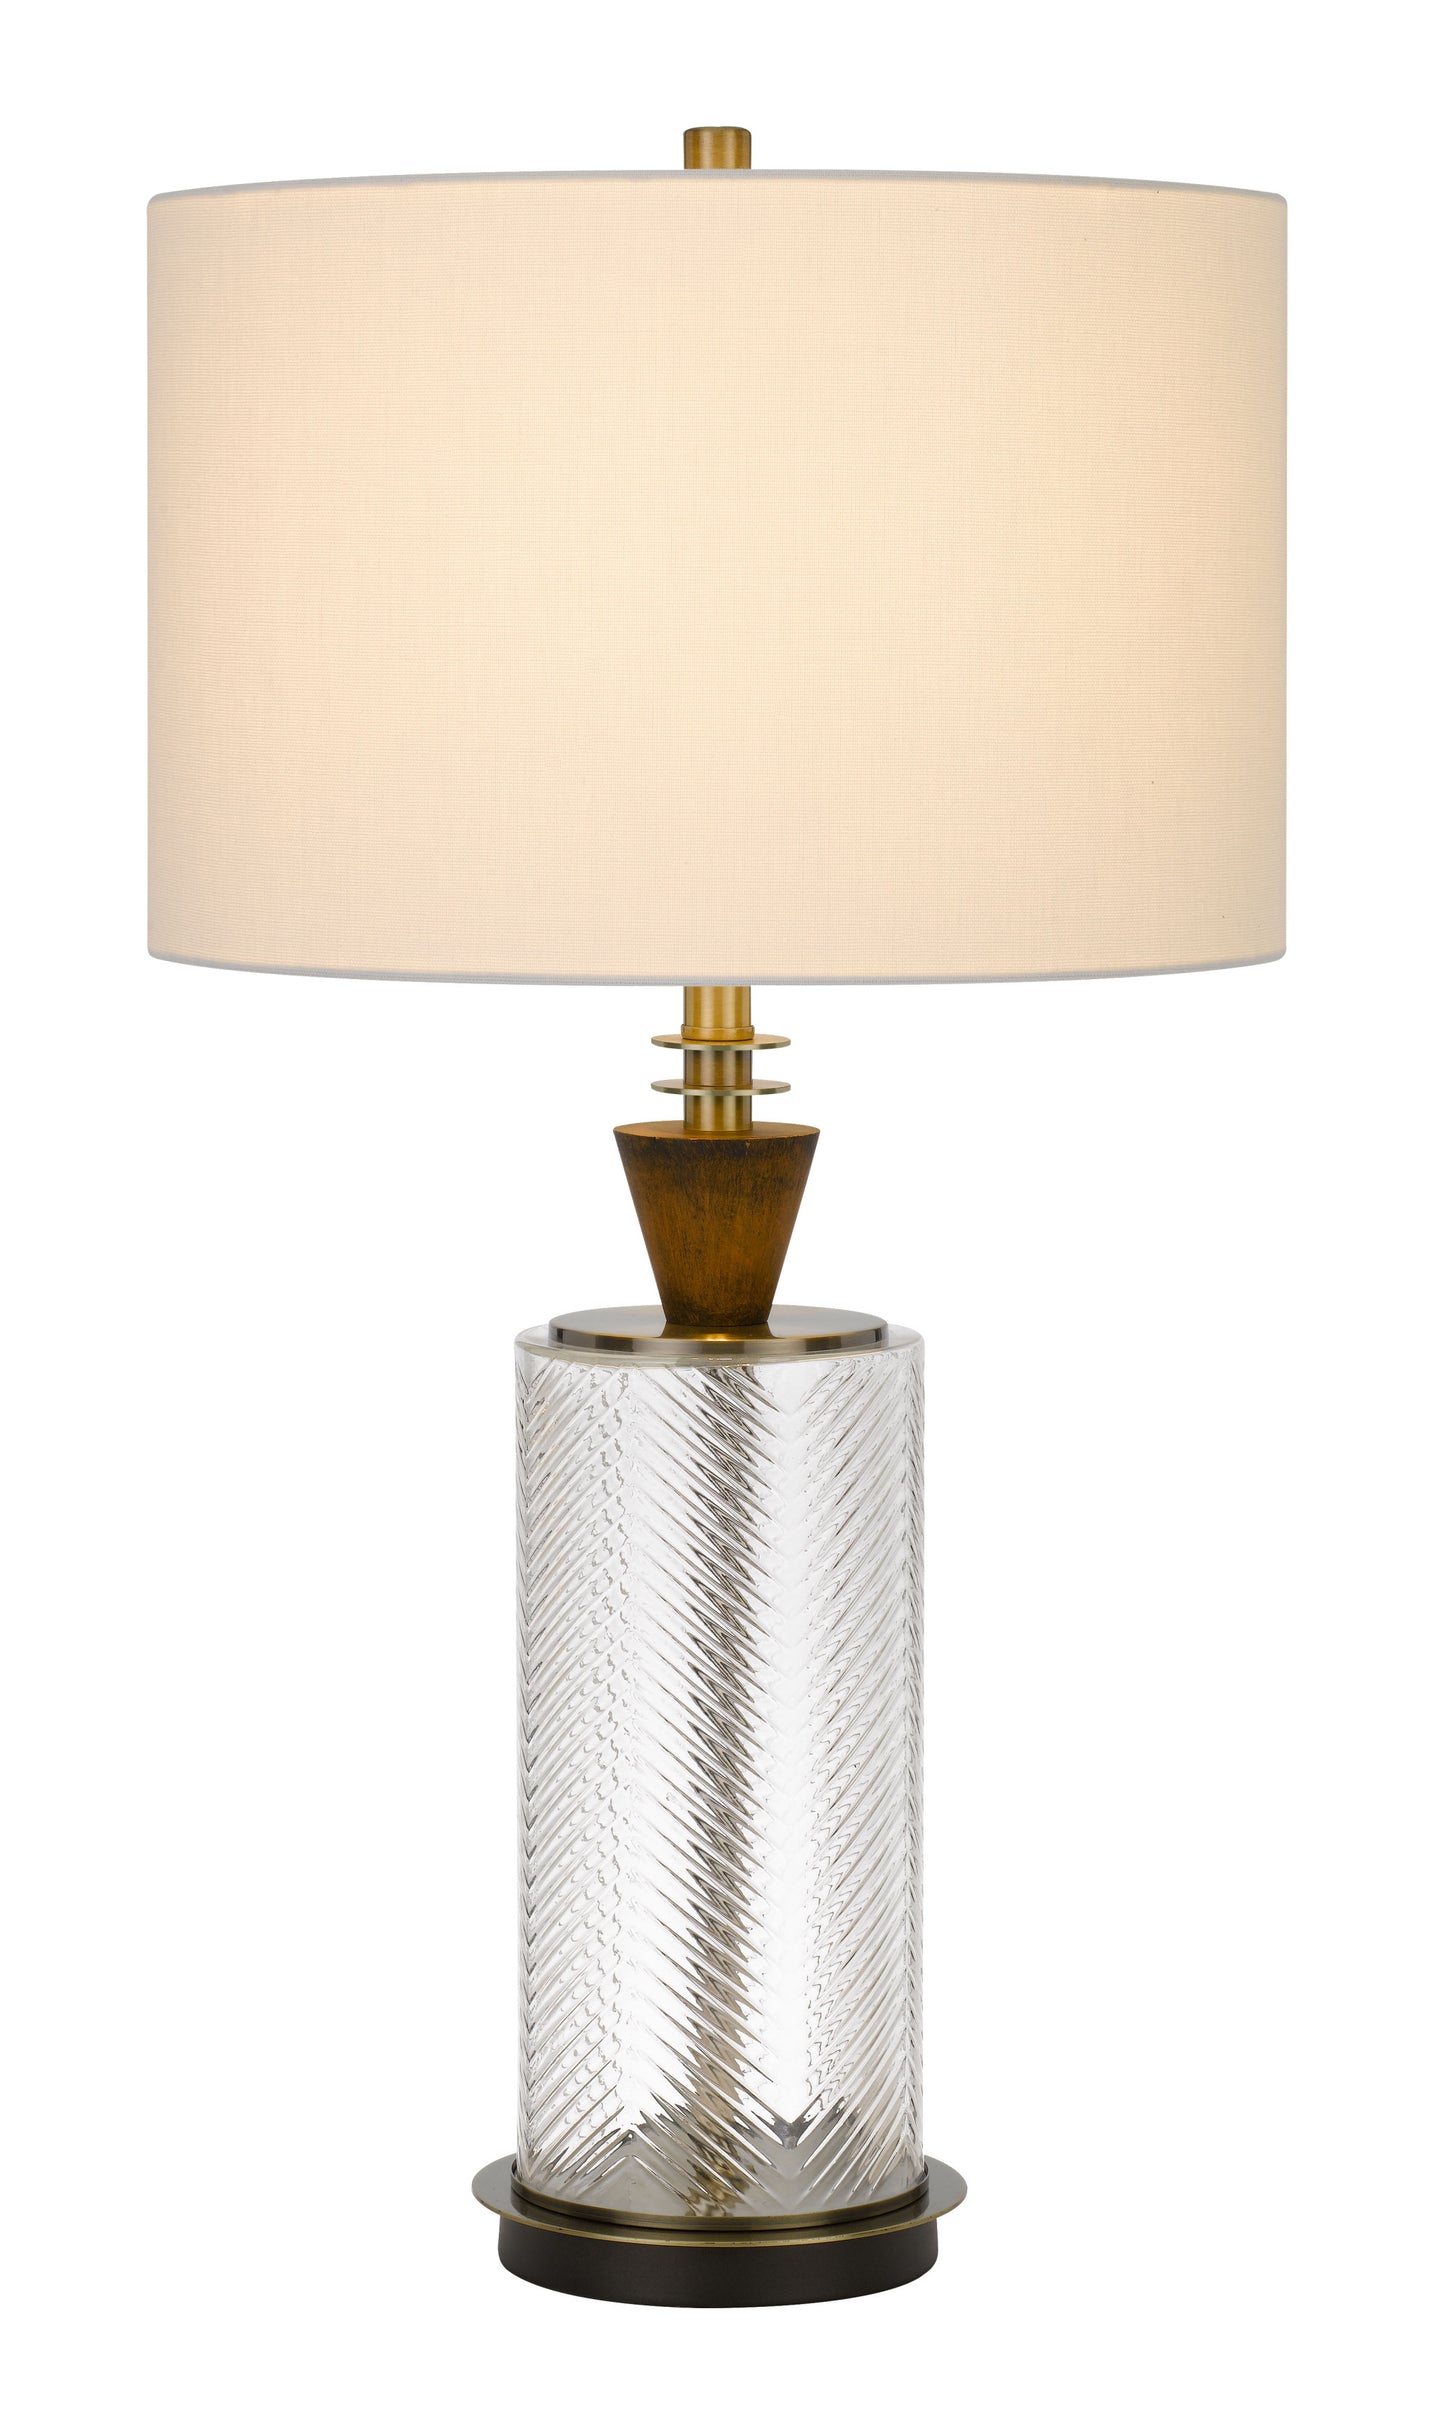 30" Clear Metal Table Lamp With White Empire Shade